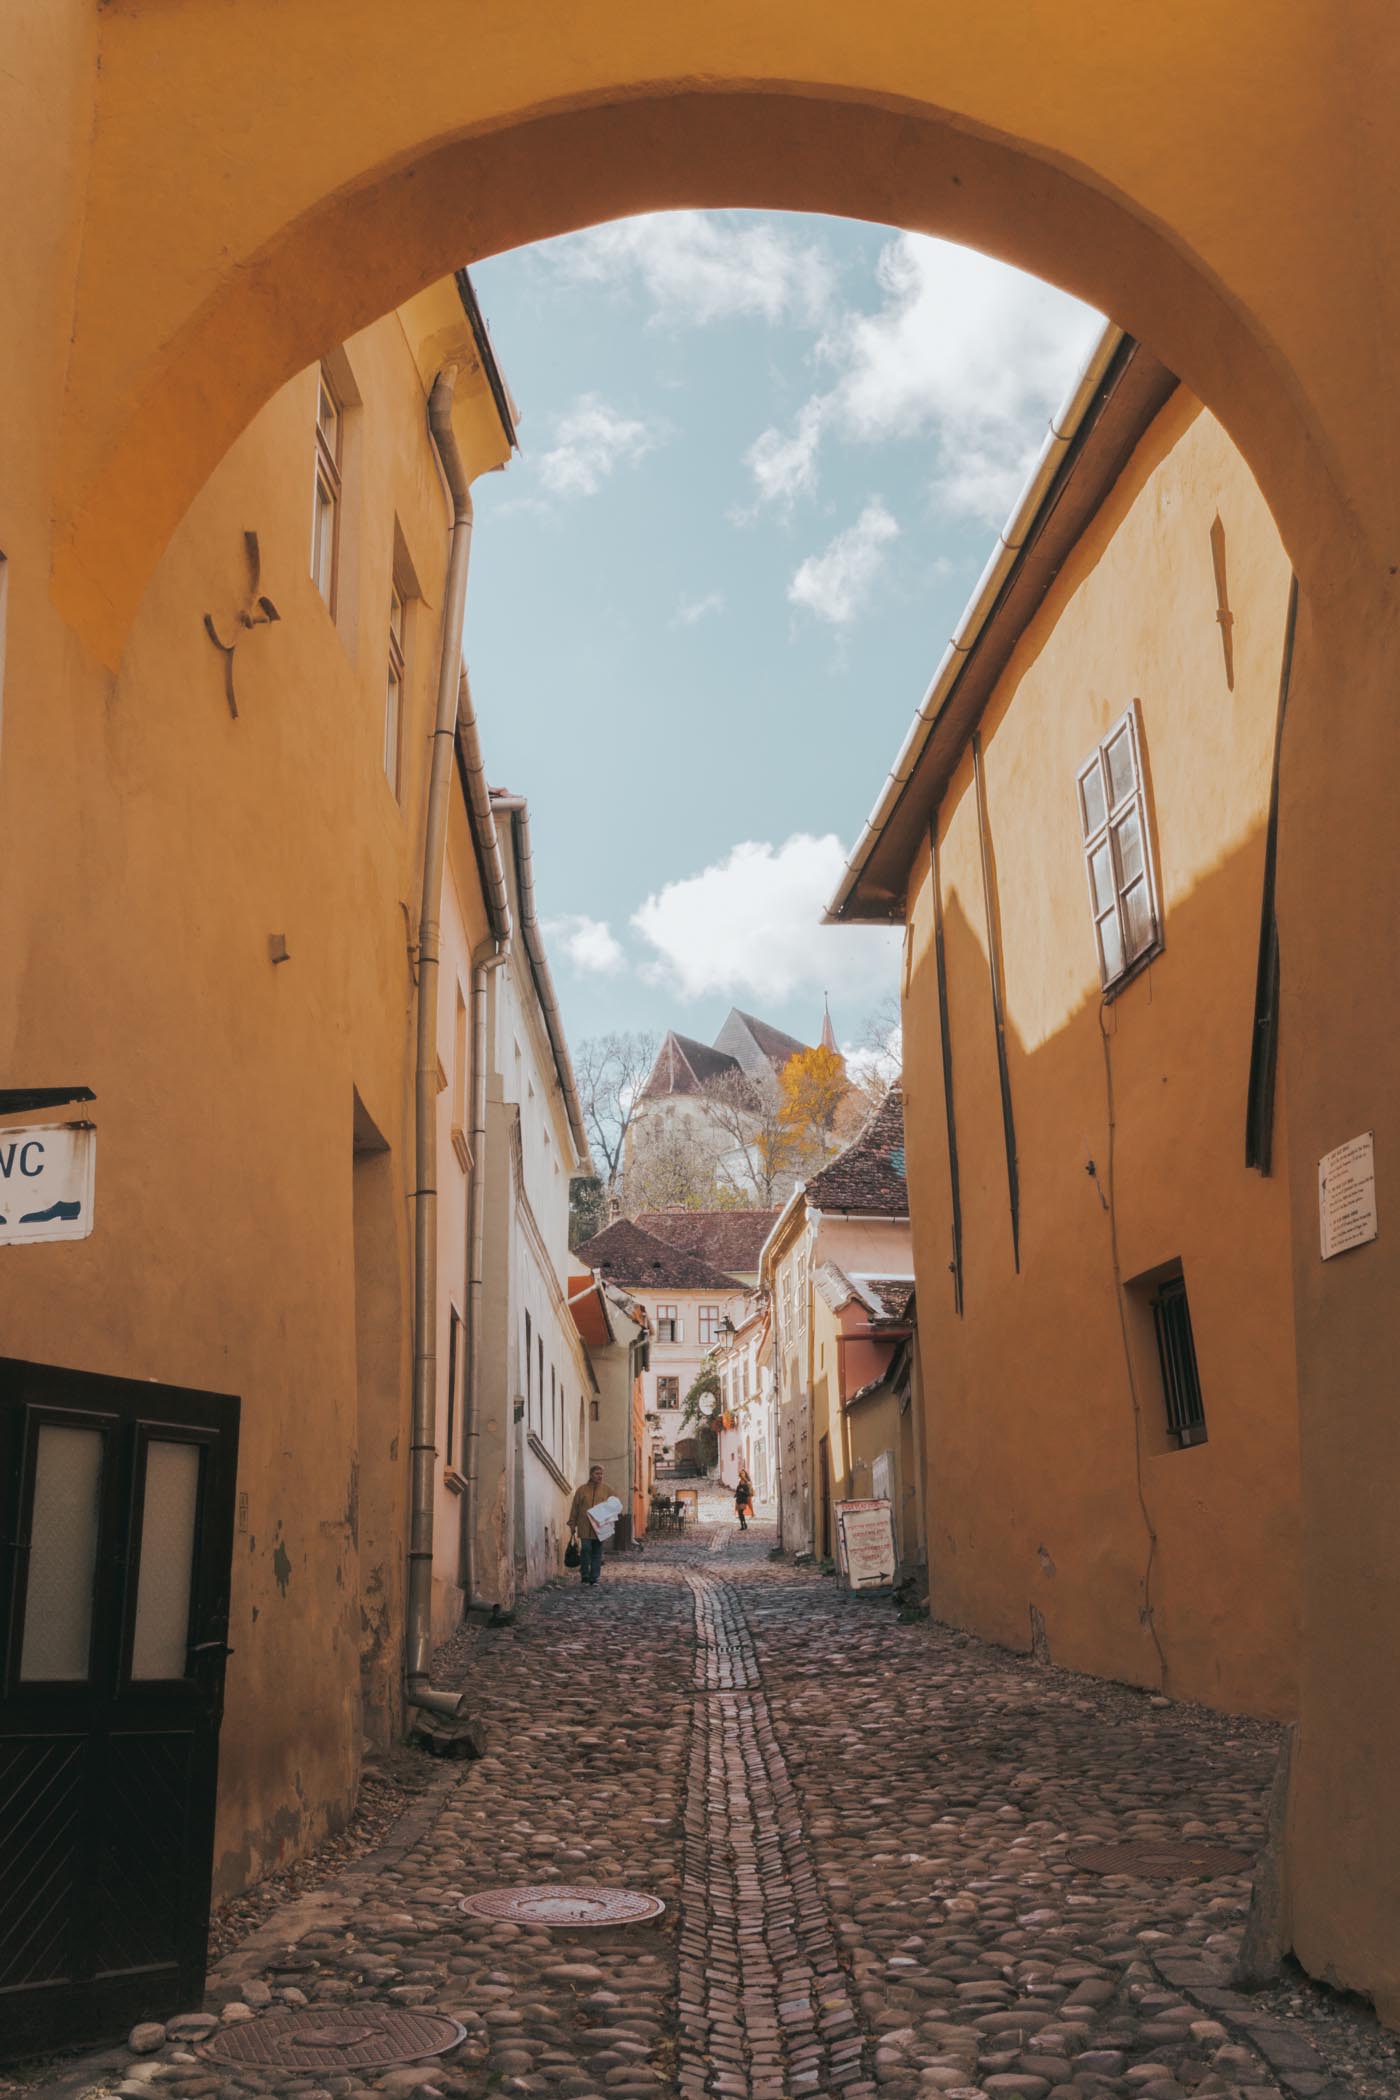 Sighisoara Day Trip Things to do in Romania on a Road Trip and places to visit Transylvania